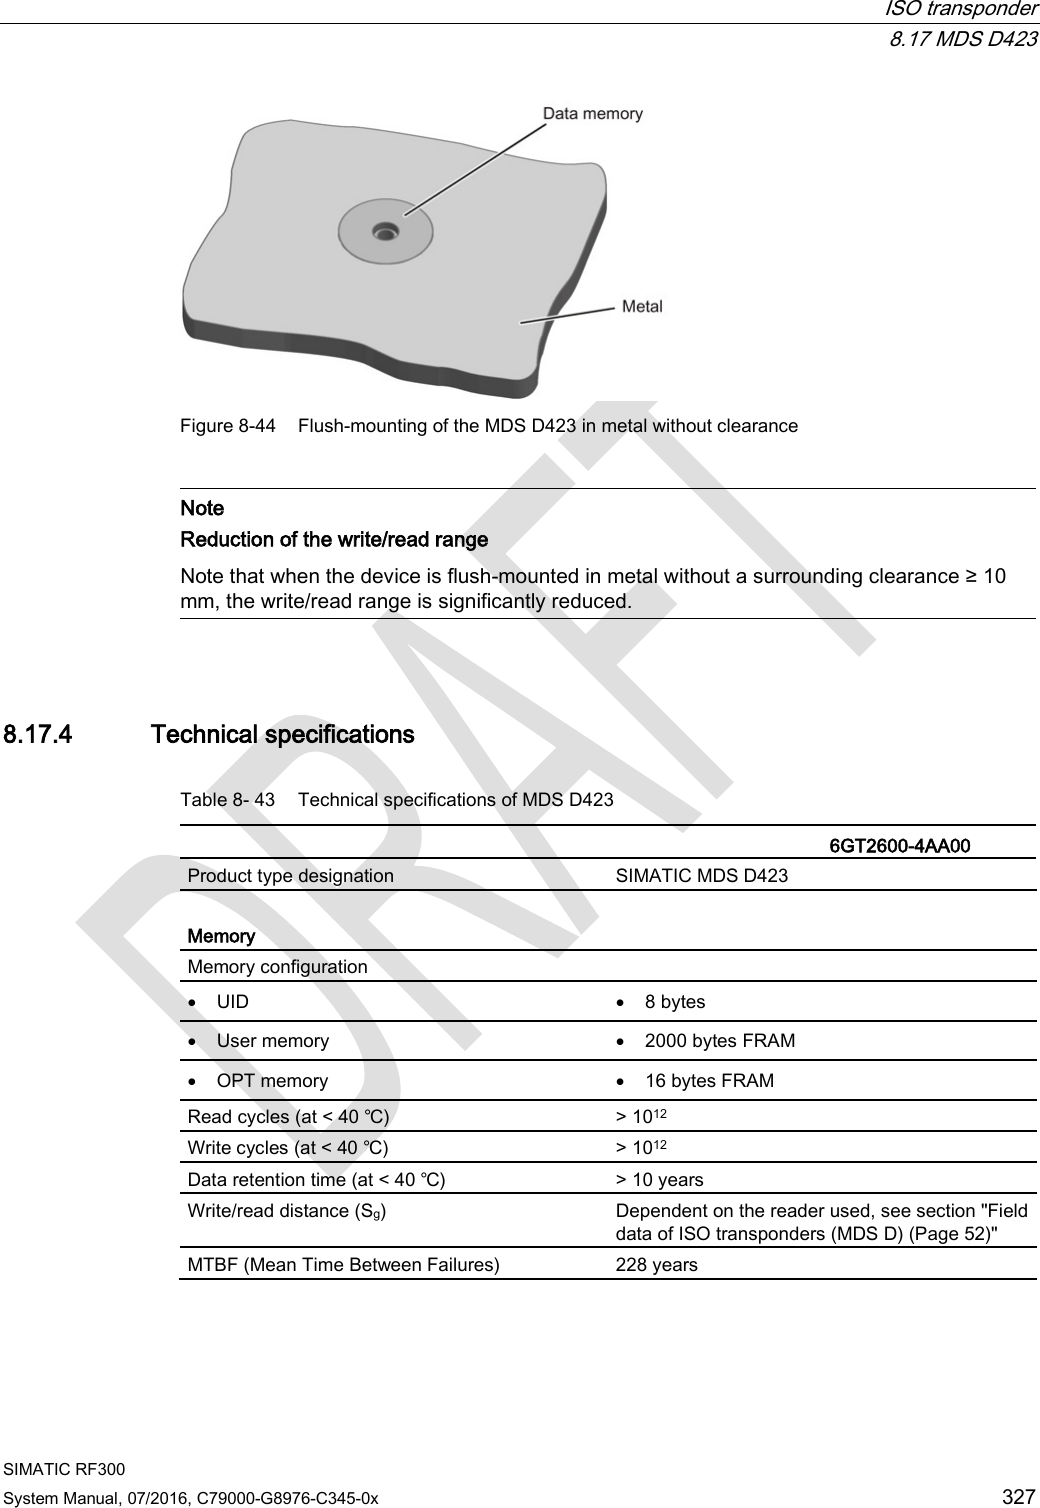  ISO transponder  8.17 MDS D423 SIMATIC RF300 System Manual, 07/2016, C79000-G8976-C345-0x 327  Figure 8-44 Flush-mounting of the MDS D423 in metal without clearance   Note Reduction of the write/read range  Note that when the device is flush-mounted in metal without a surrounding clearance ≥ 10 mm, the write/read range is significantly reduced.  8.17.4 Technical specifications Table 8- 43 Technical specifications of MDS D423    6GT2600-4AA00 Product type designation SIMATIC MDS D423  Memory Memory configuration   • UID • 8 bytes • User memory • 2000 bytes FRAM • OPT memory • 16 bytes FRAM Read cycles (at &lt; 40 ℃) &gt; 1012 Write cycles (at &lt; 40 ℃) &gt; 1012 Data retention time (at &lt; 40 ℃) &gt; 10 years Write/read distance (Sg)  Dependent on the reader used, see section &quot;Field data of ISO transponders (MDS D) (Page 52)&quot; MTBF (Mean Time Between Failures) 228 years 